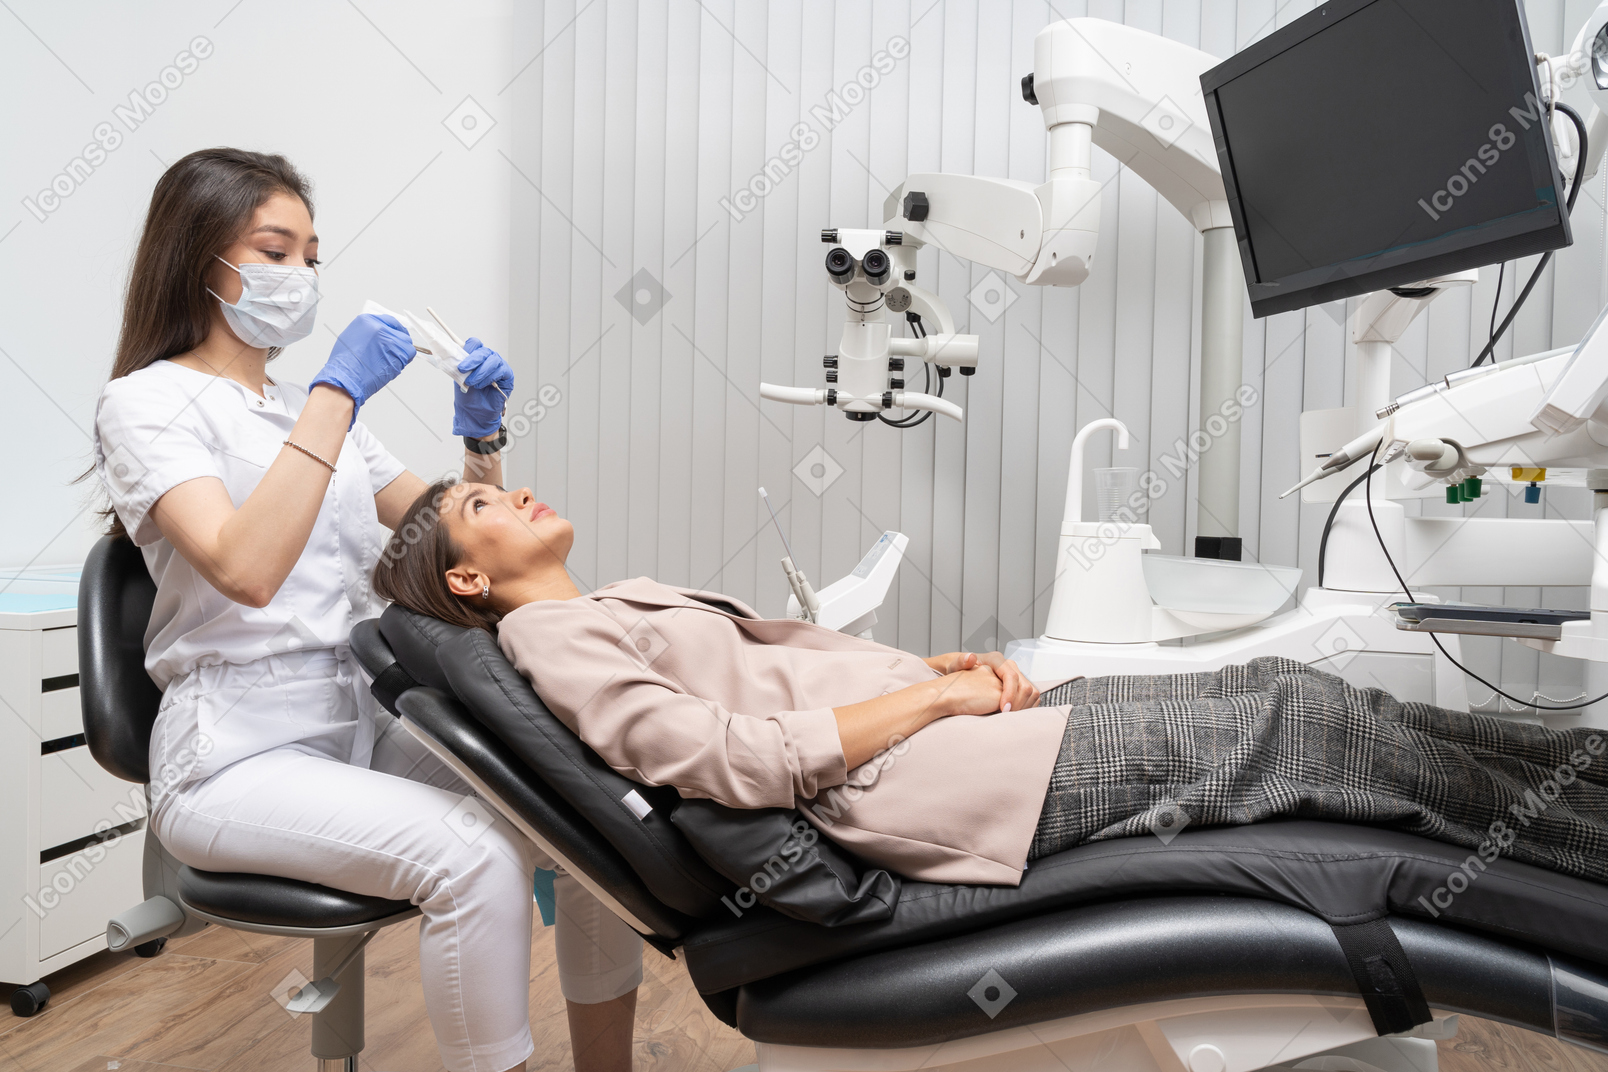 Full-length of a female dentist examining her patient